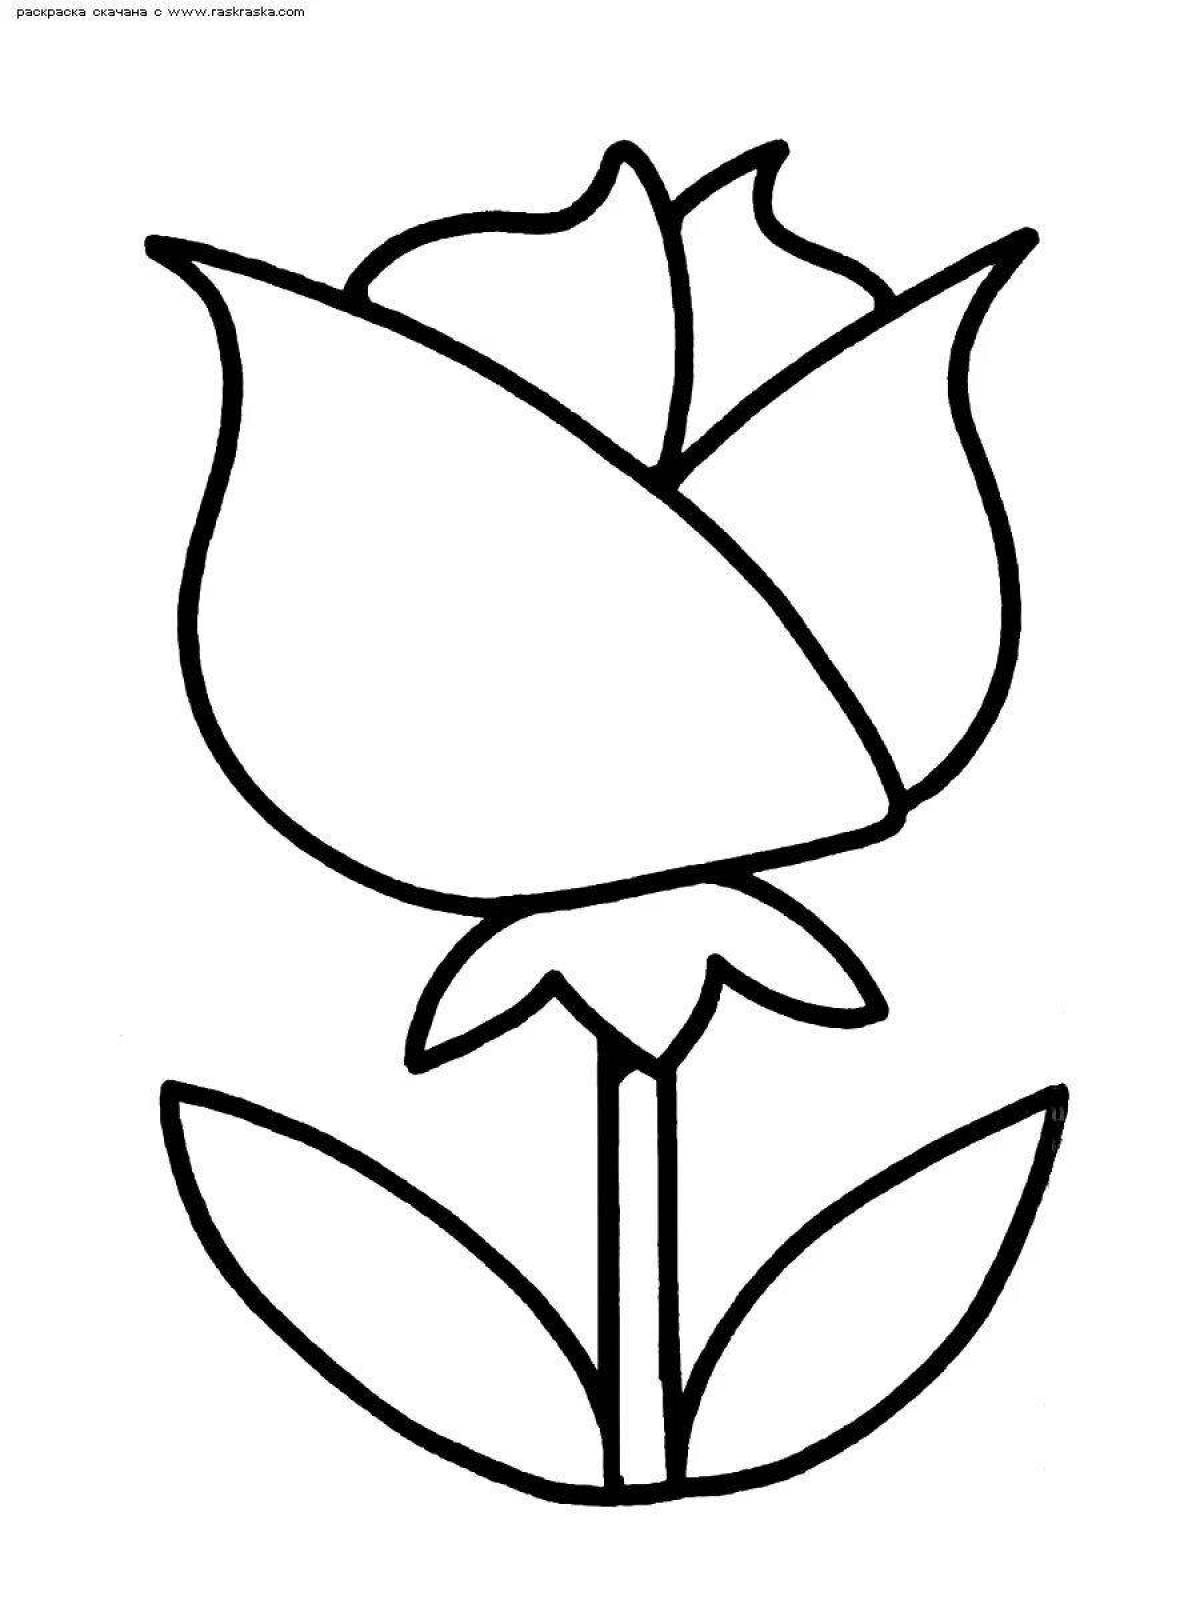 Fun simple drawing coloring page